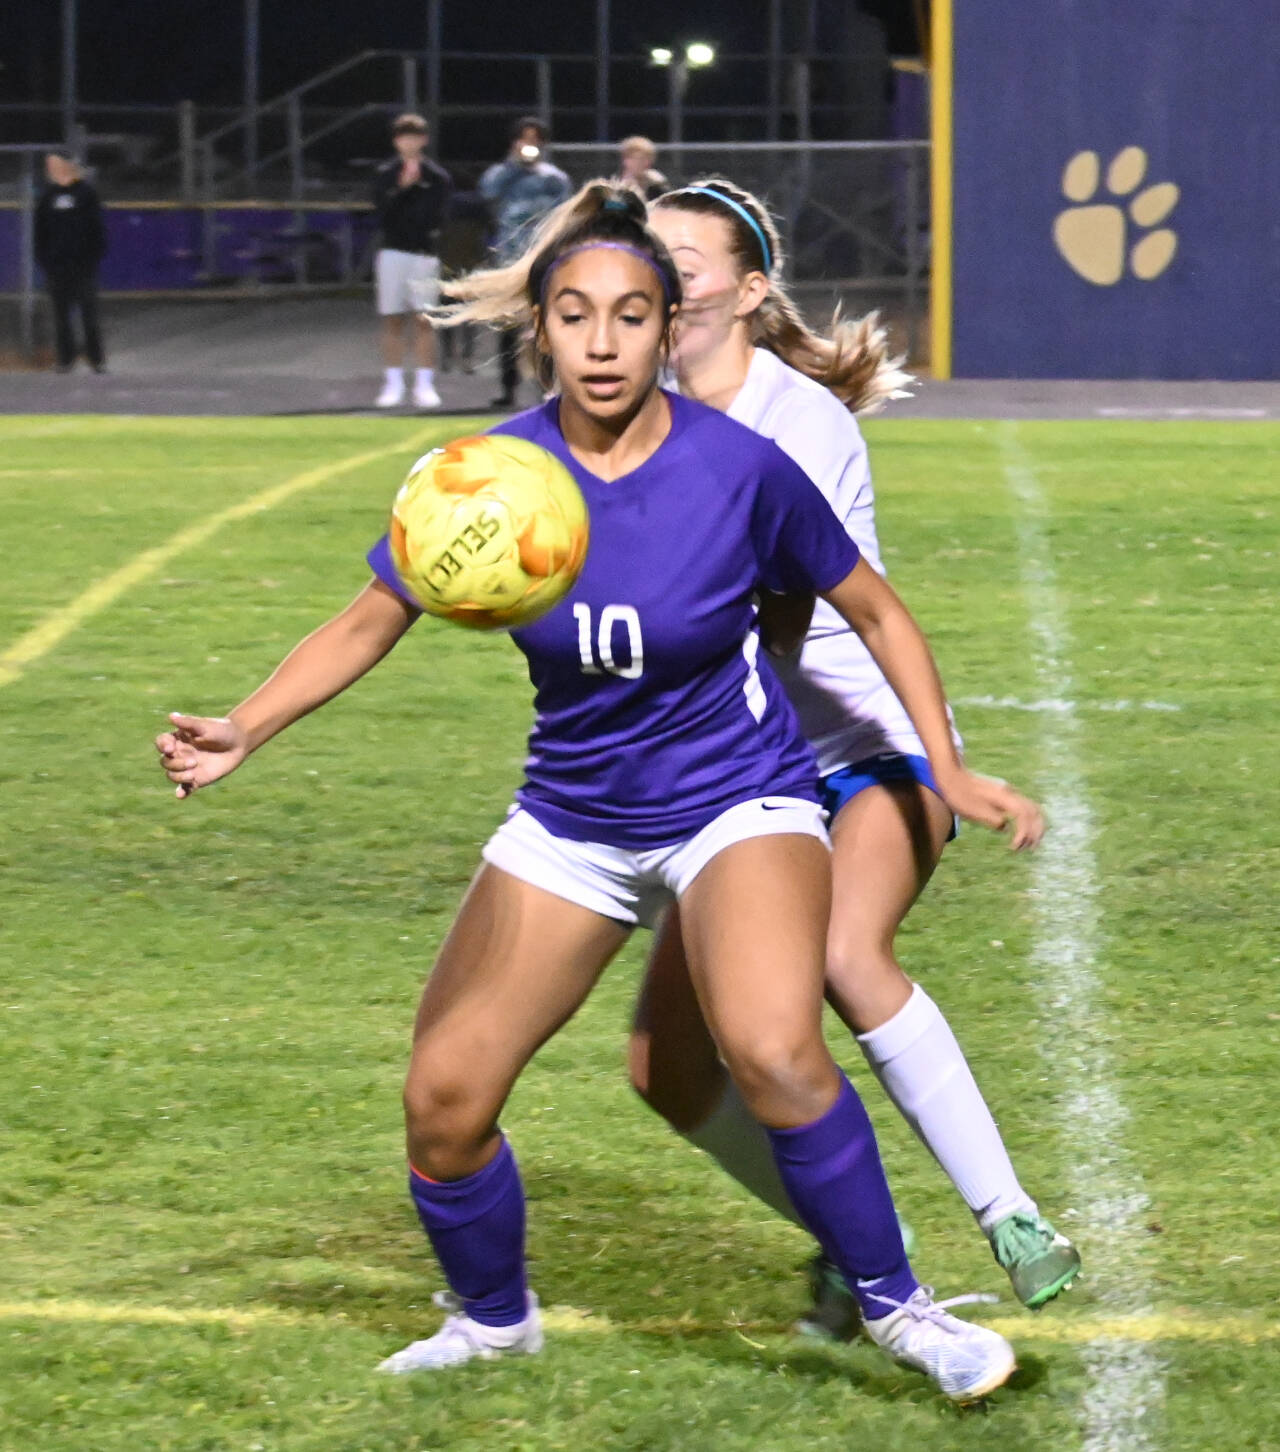 Sequim Gazette photos by Michael Dashiell
Sequim’s Jennyfer Gomez vies for the ball with Bremerton’s Melanie Uhrich in the Wolves’ 4-0 win in Sequim on Sept. 29.